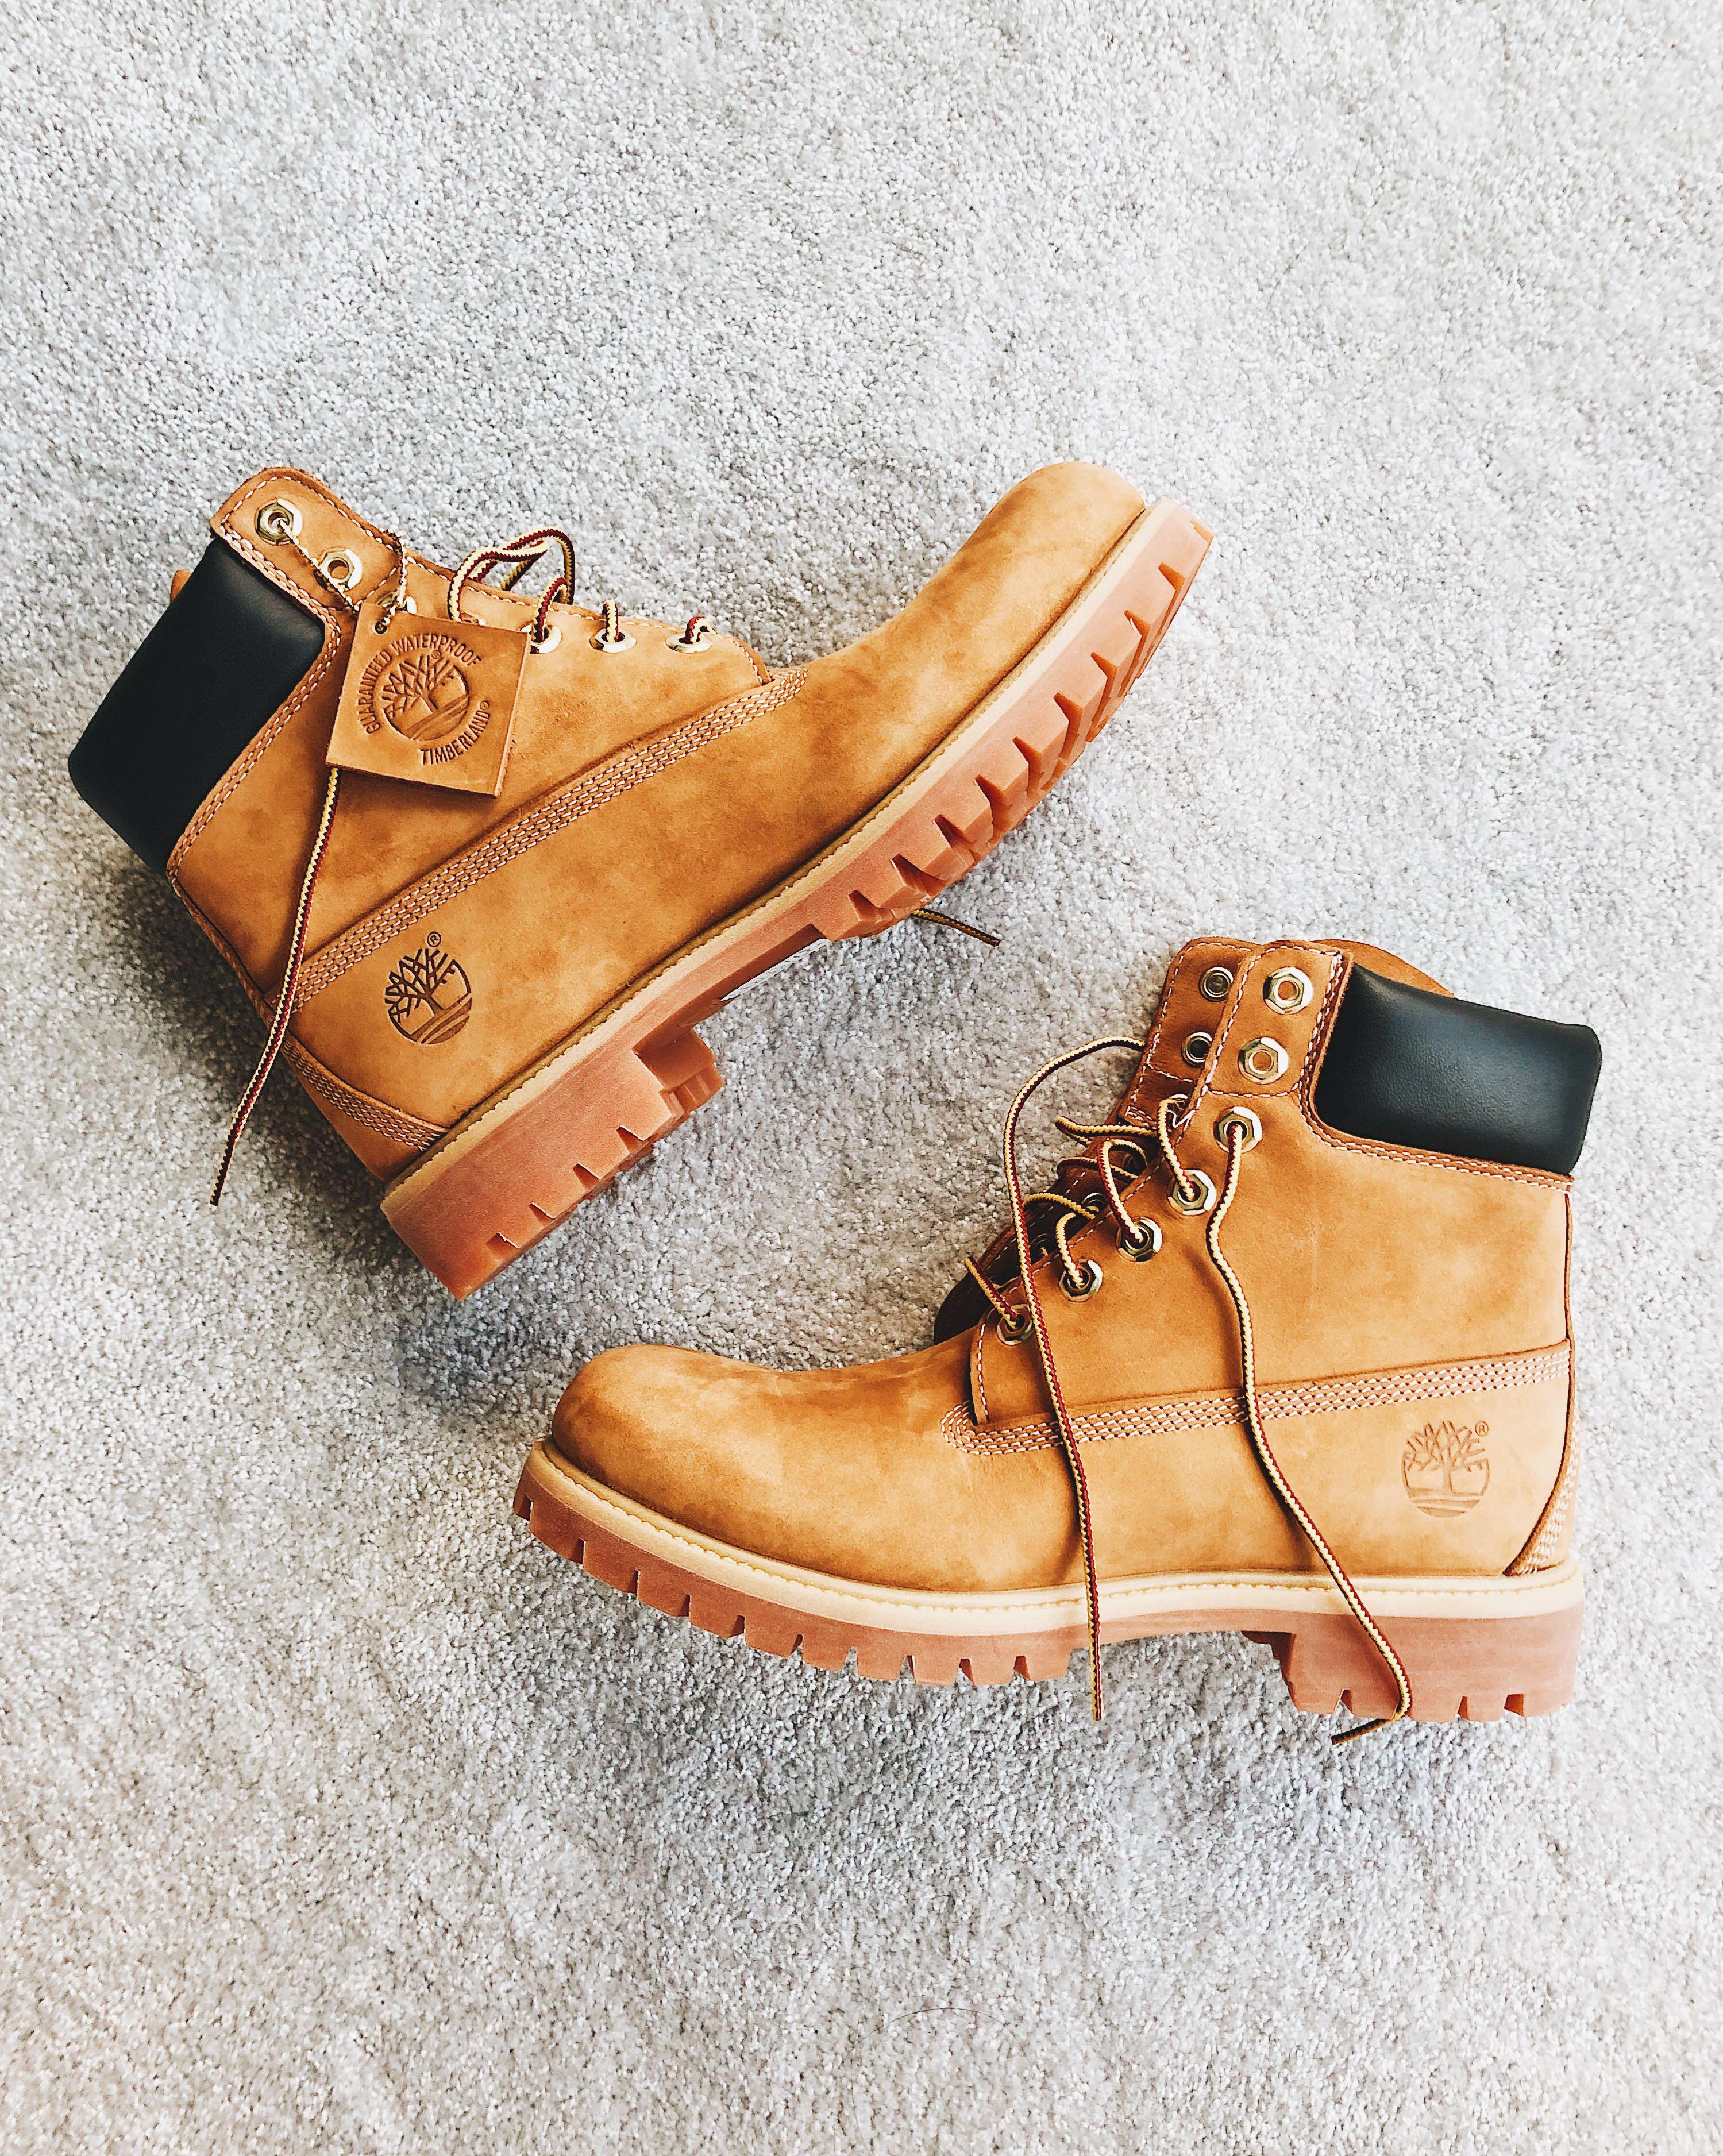 6 inch wheat timberlands